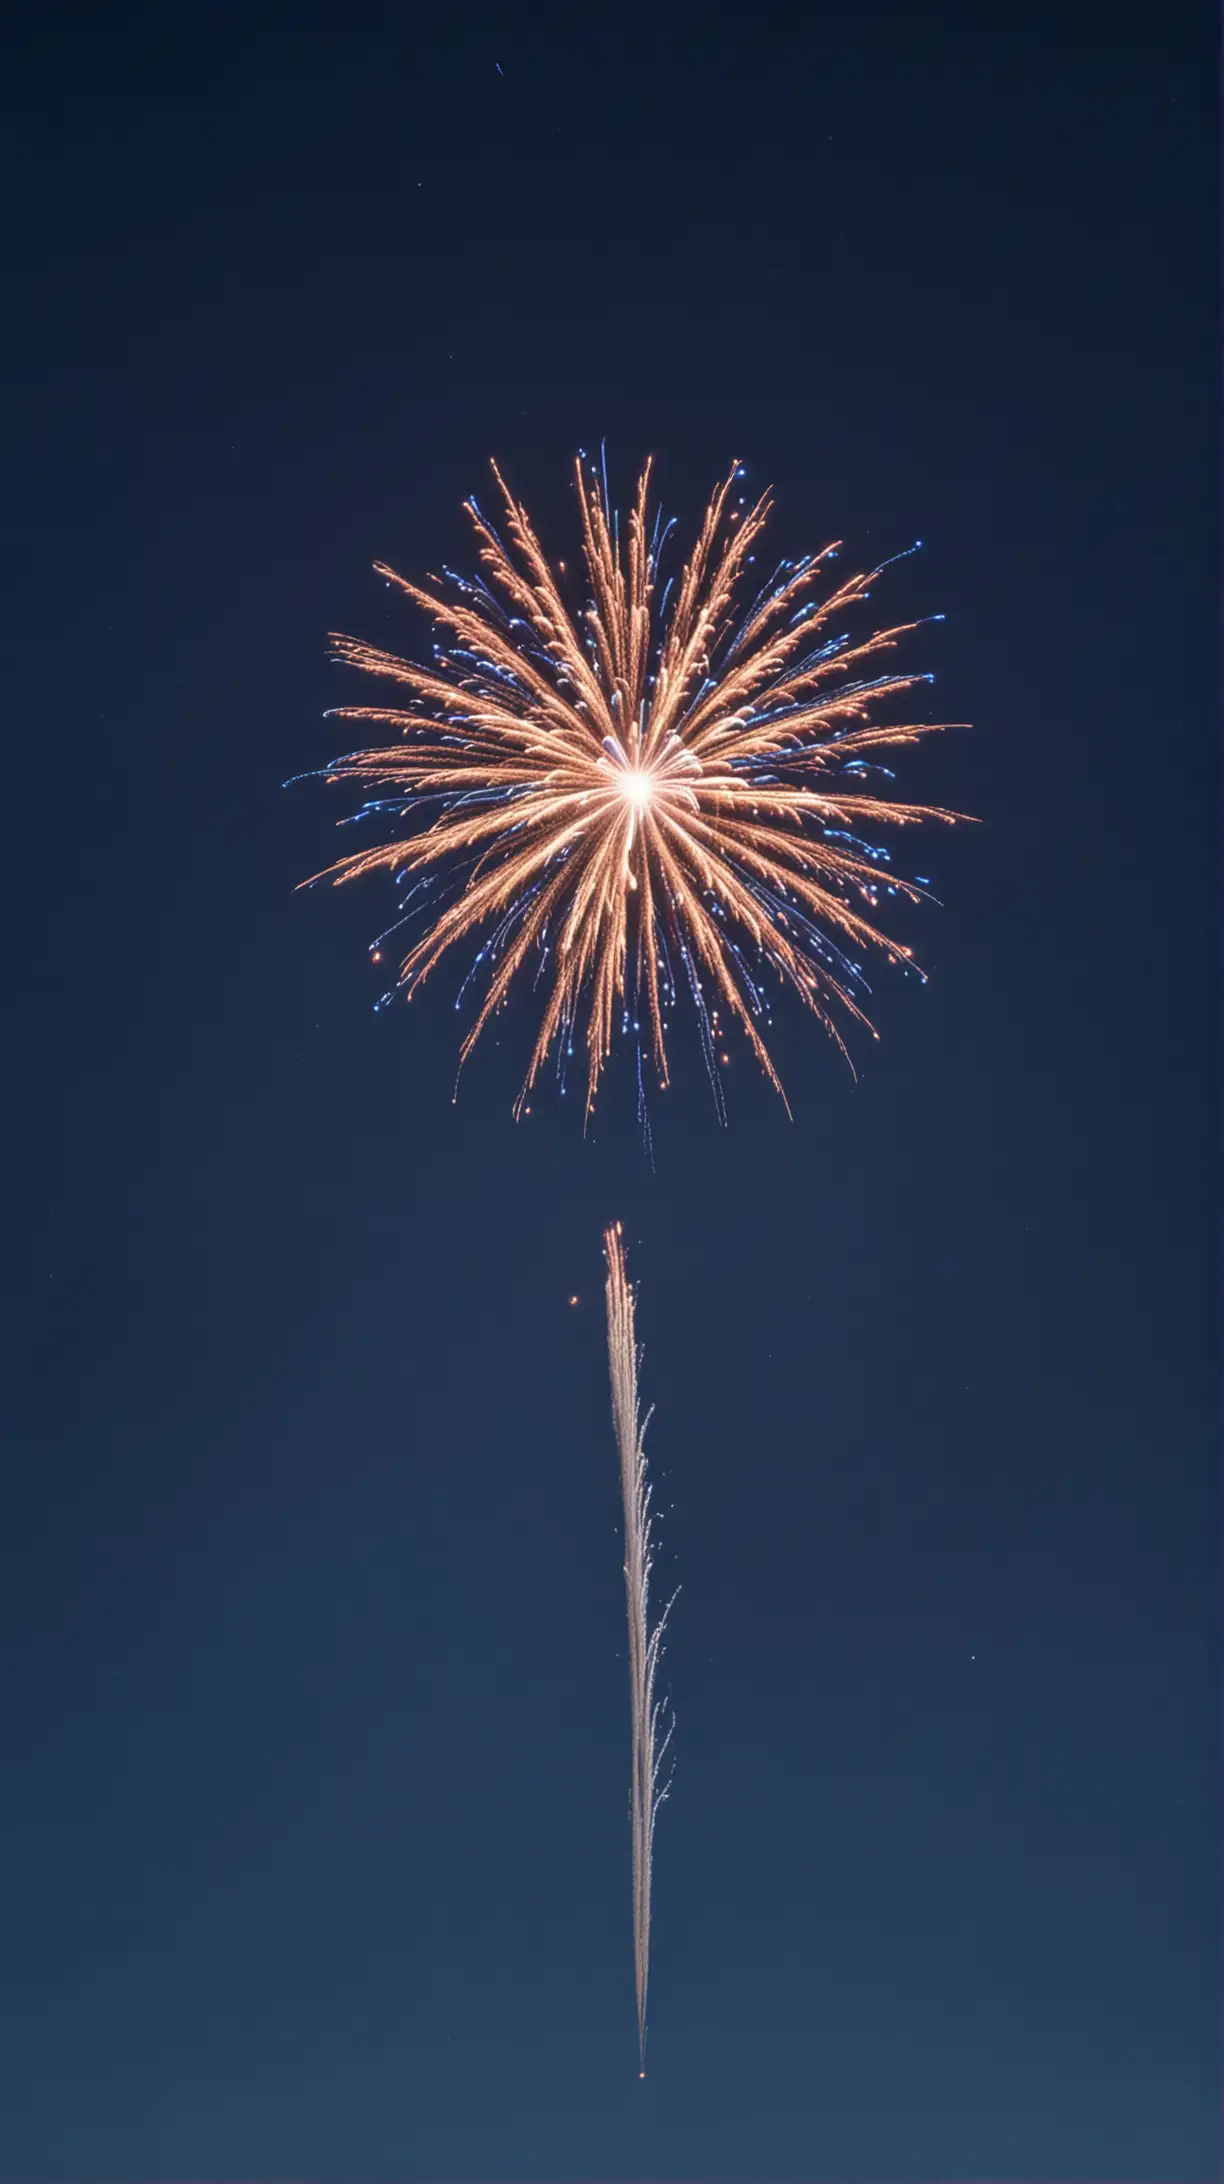 one very miniscule colored super SMALL glowing firework High in the sky with a very big natural darkish bold blue sky background with dimension to it and with no ground